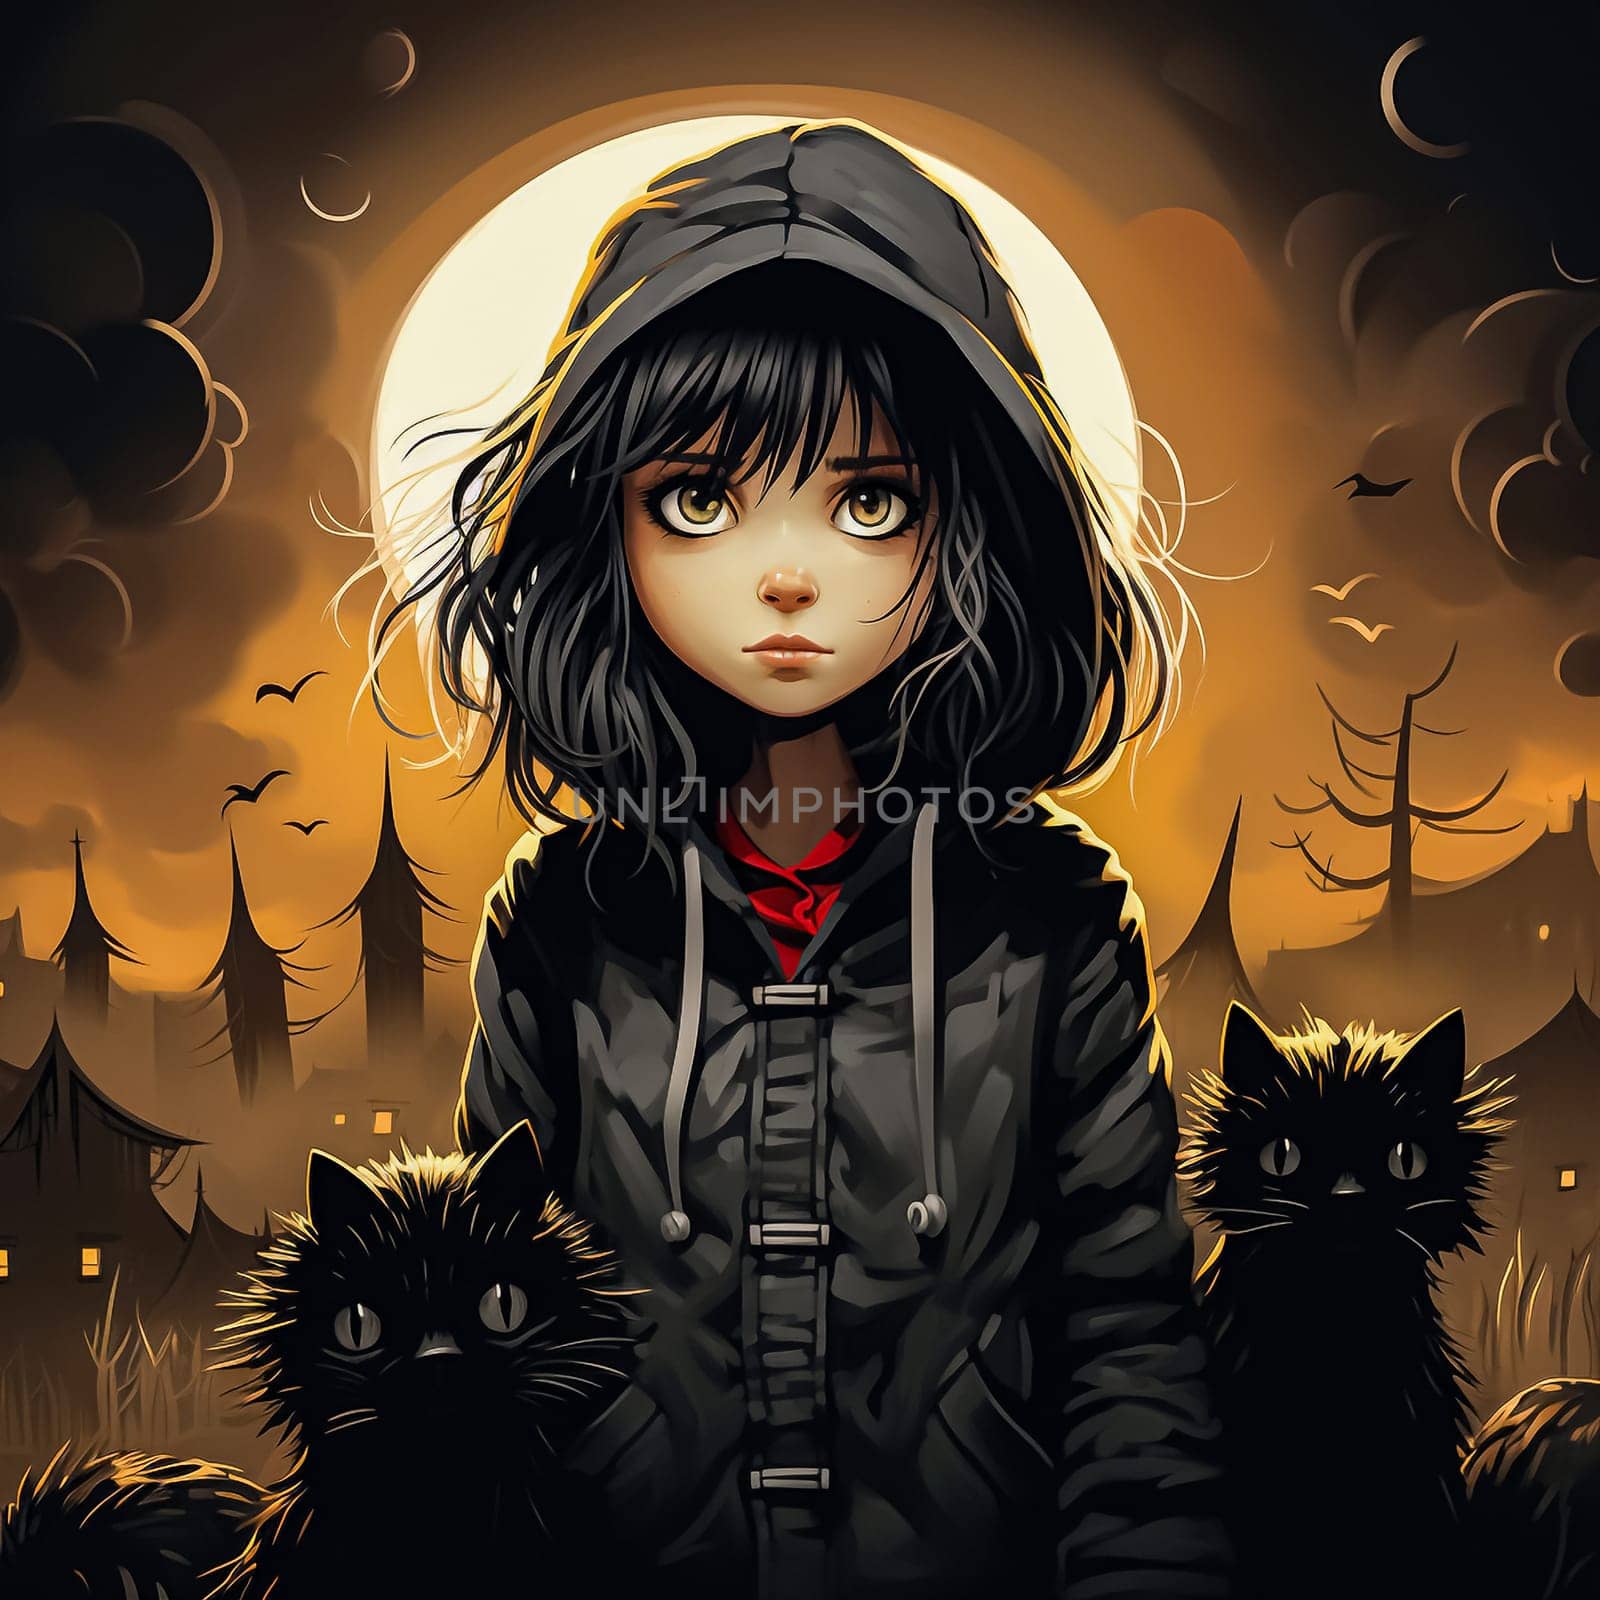 Girl with black hair, surrounded by cats dark, Halloween themed illustration